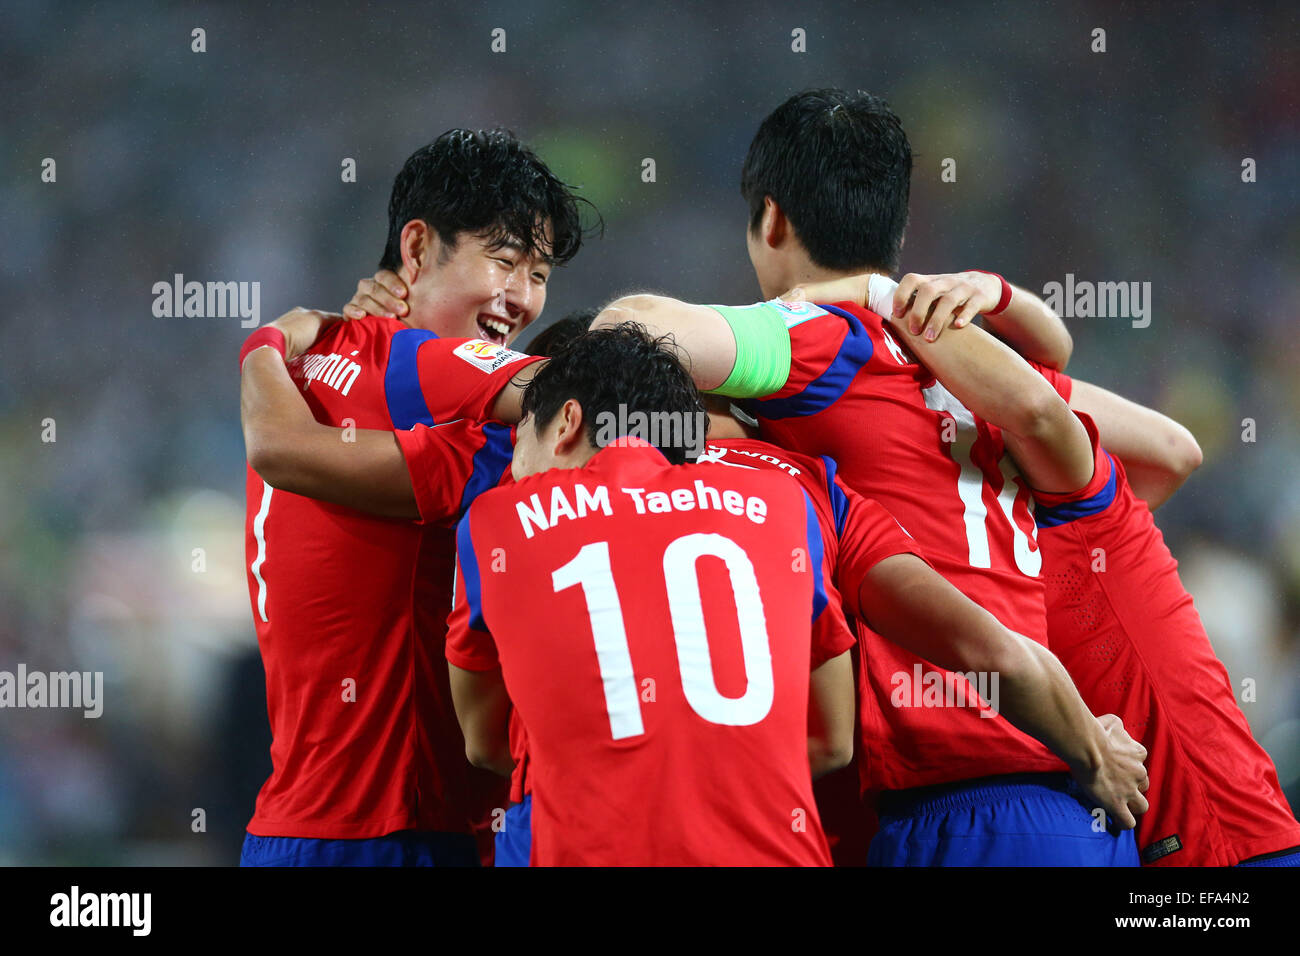 Sydney, Australia. 26th Jan, 2015. South Korea team group (KOR) Football/Soccer : Players of South Korea celebrate scoring their team second goal by Kim Young-Gwon during the AFC Asian Cup Australia 2015 semi-final match between South Korea 2-0 Iraq at the Stadium Australia in Sydney, Australia . © Kenzaburo Matsuoka/AFLO/Alamy Live News Stock Photo